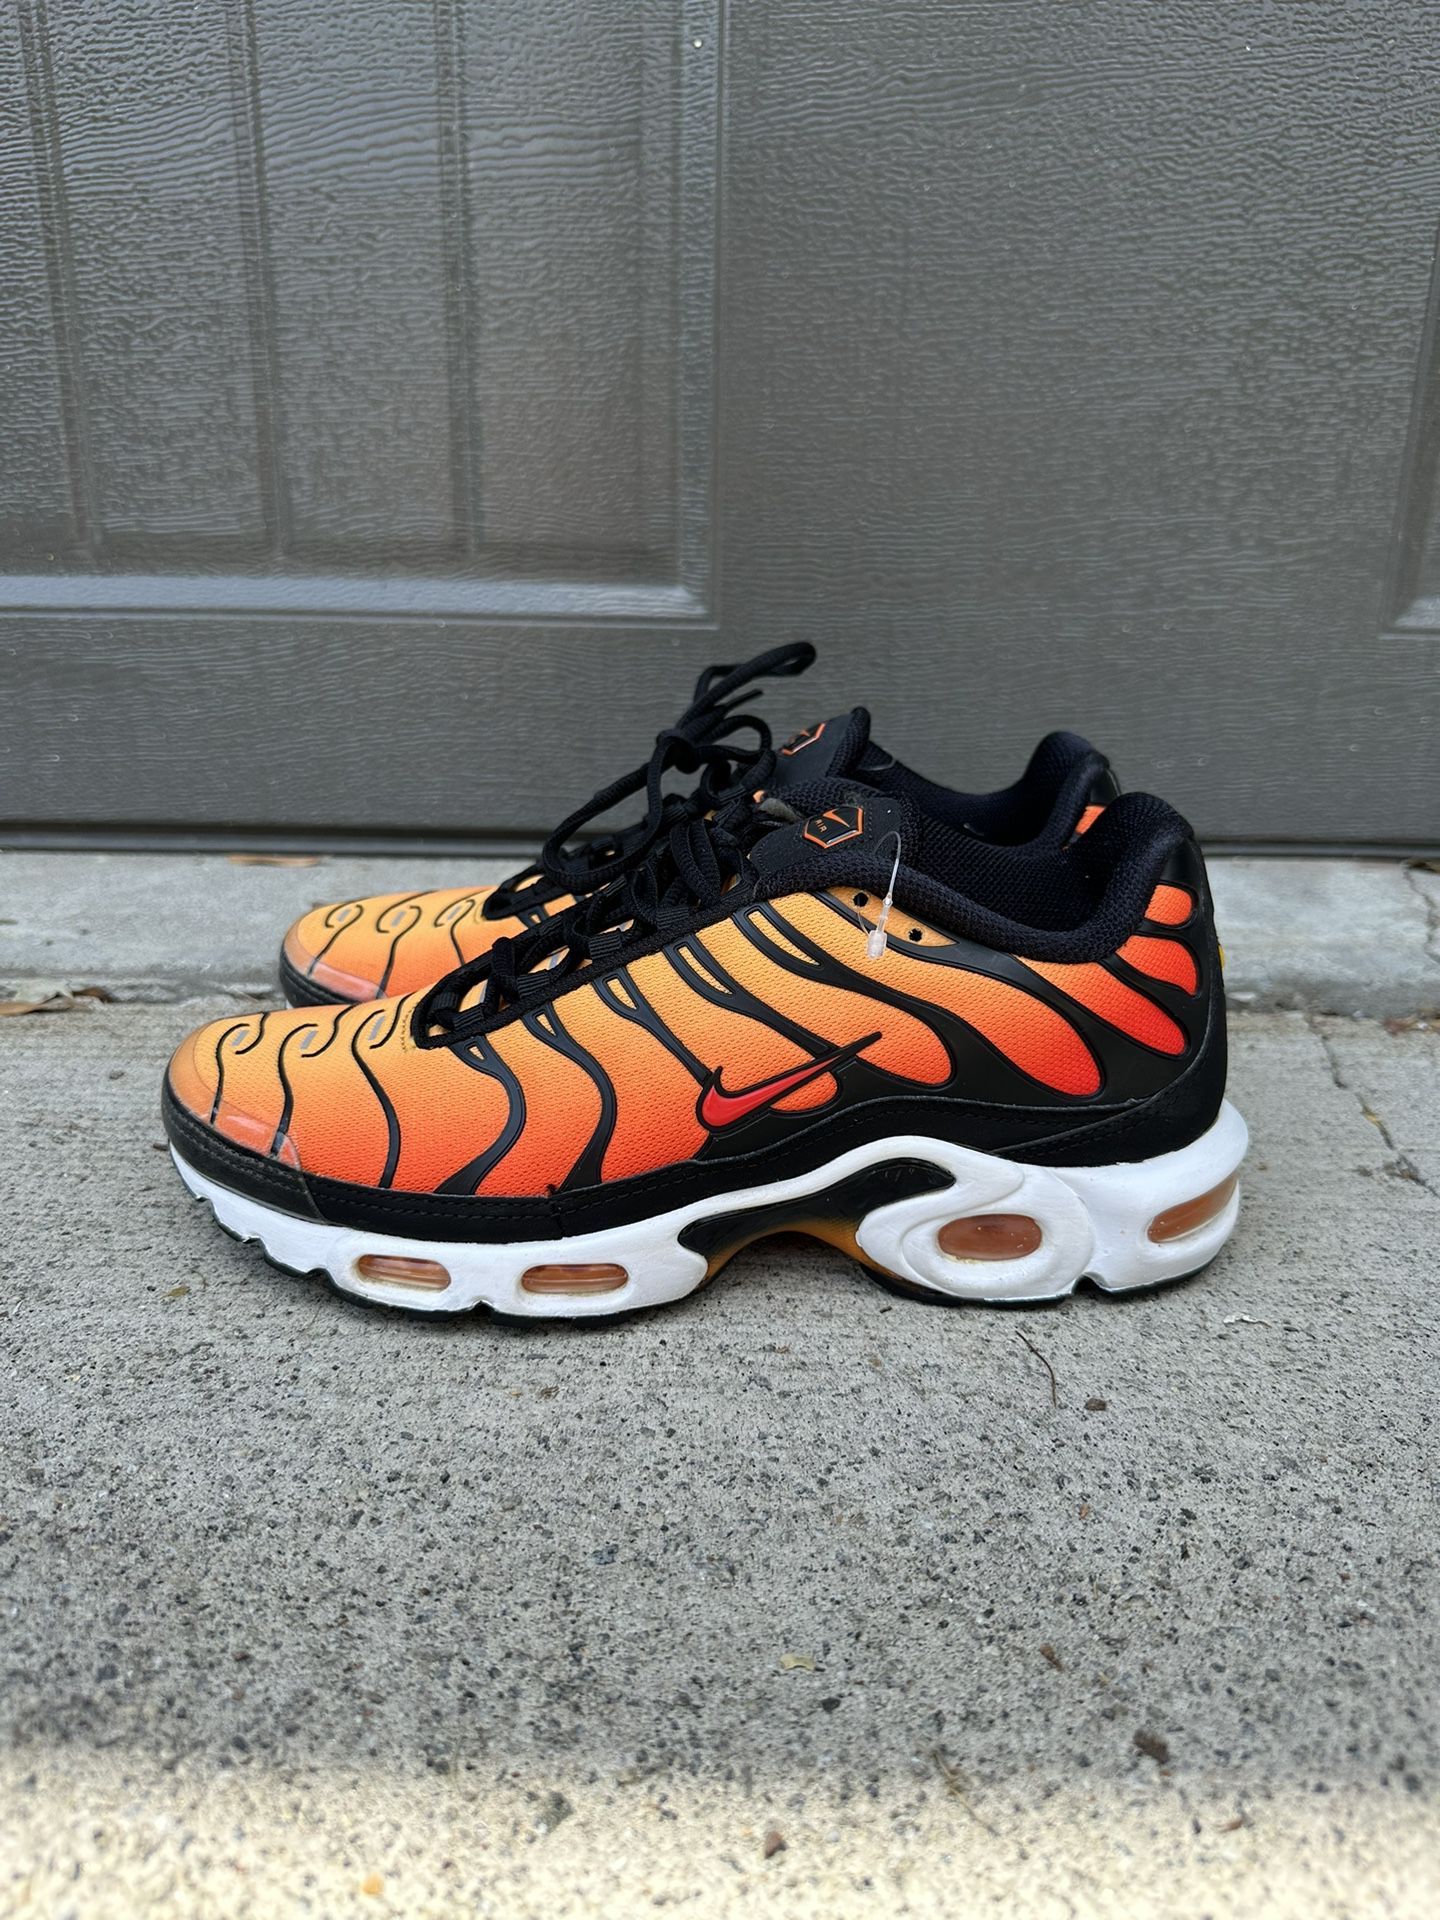 Size 8 Nike Air Max TN Plus Sunset 2018 Hyper Blue 90 95 97 1 Light 96 98 93. Just no box. They are In fantastic shape for Sale in Duluth, GA - OfferUp